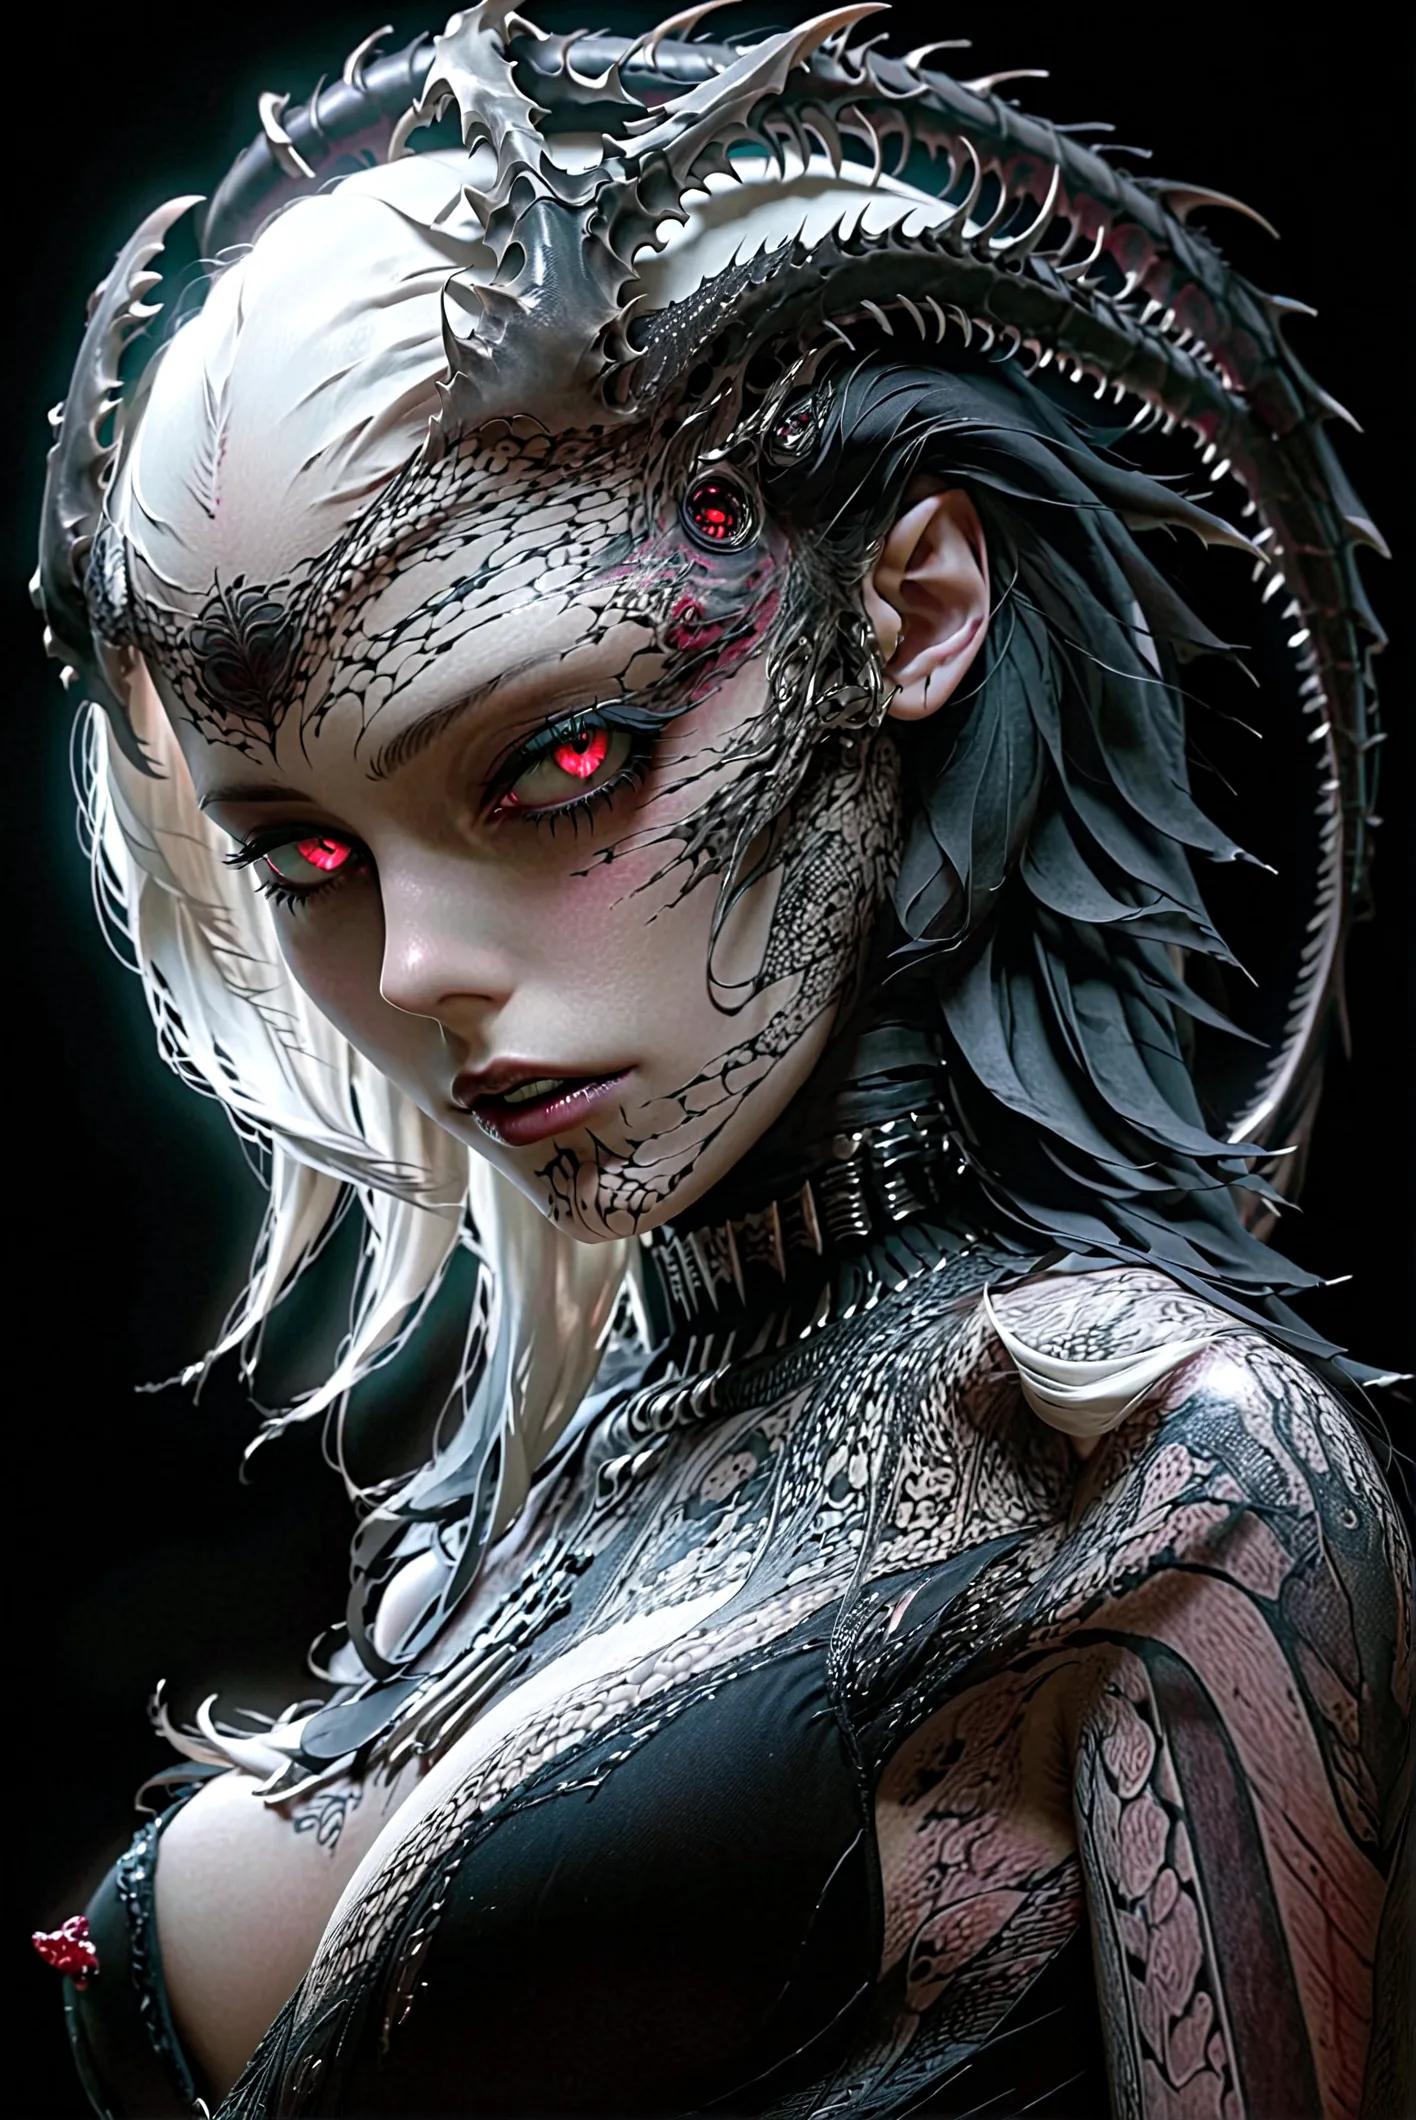 Hr giger tattooed sexy seductive dead girl, perfect face, hyper detailed ruby eyes, full body view,